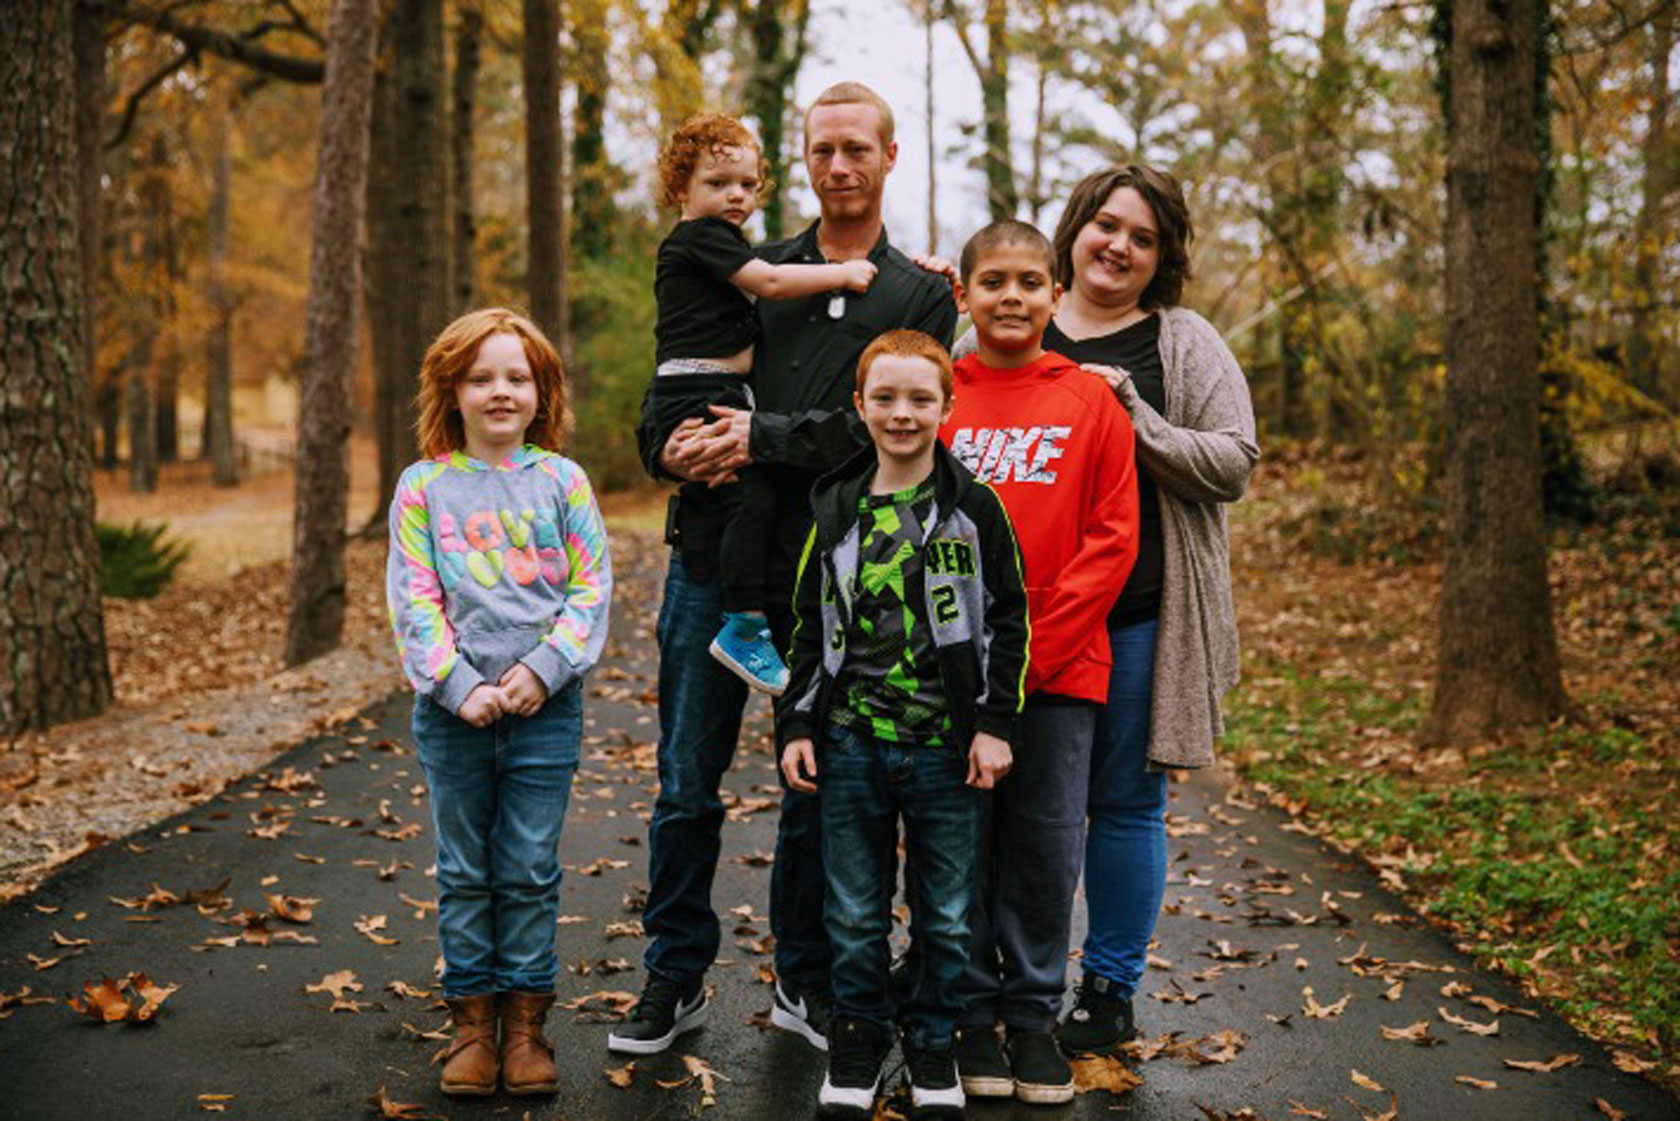 Hannah Ochoa is pictured with her fiance, Robert, and children, Jayden, Justin, Wyatt, and Arianna, in December 2021. (Photo credit: Riley Bunch, Georgia Public Broadcasting) 